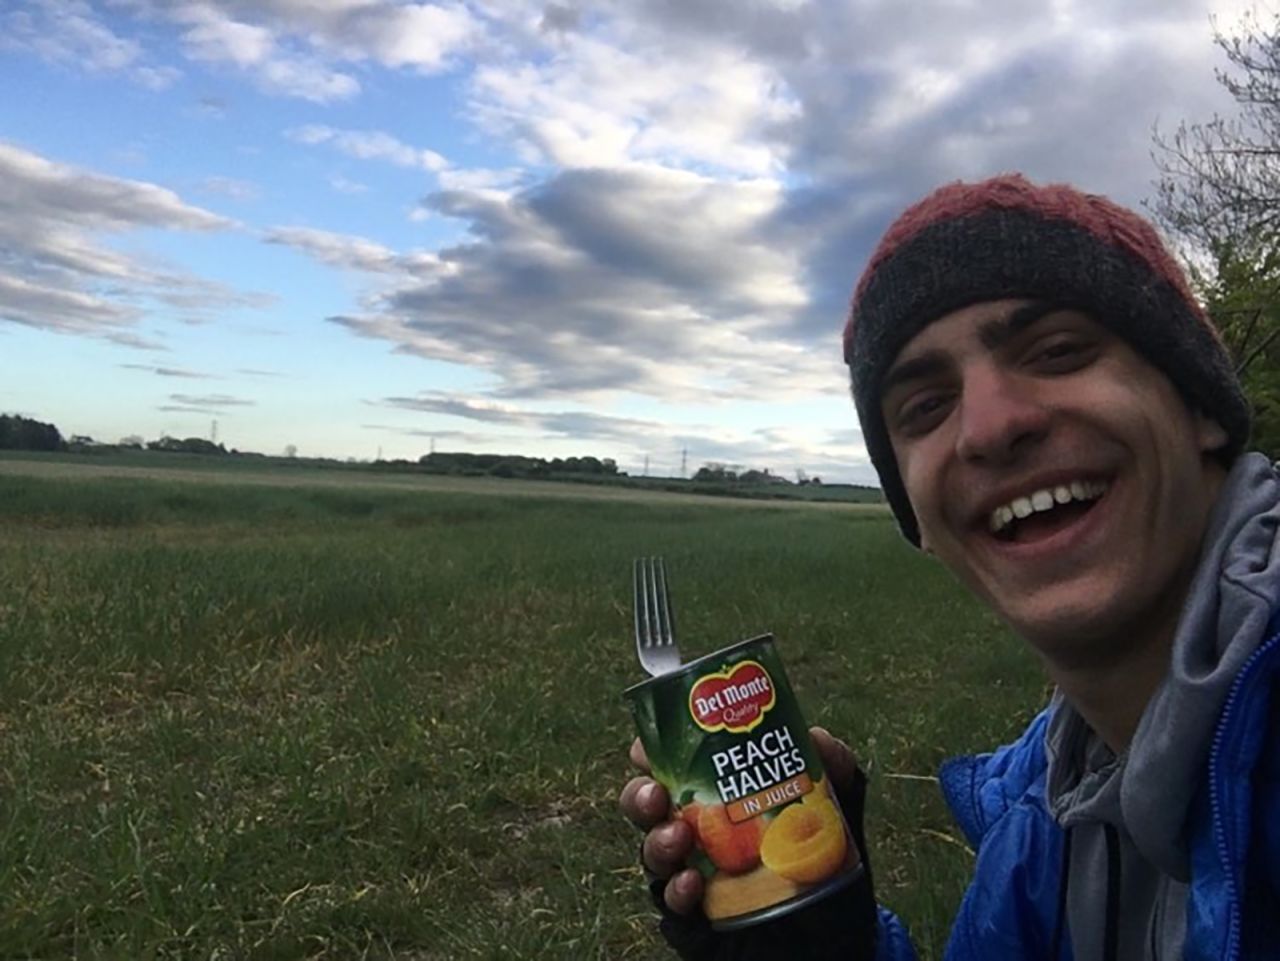 Papadimitriou packed canned goods and bread for his 48-day trip